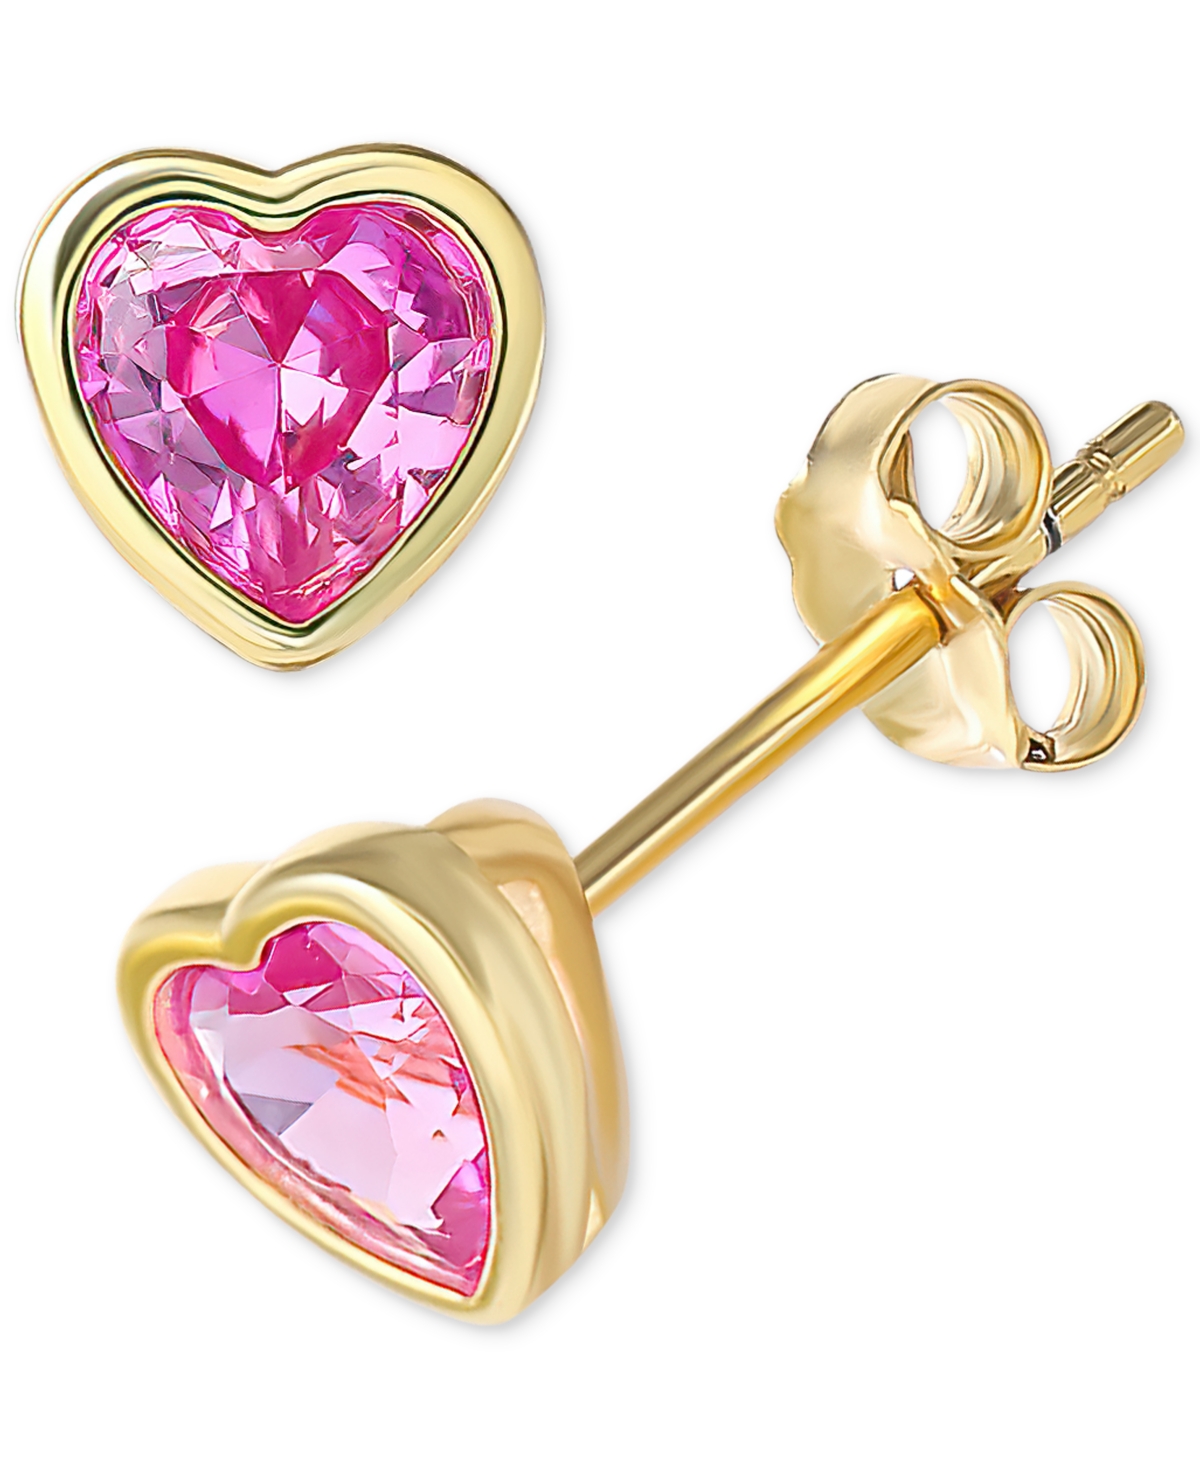 Giani Bernini Pink Cubic Zirconia Heart Stud Earrings In 18k Gold-plated Sterling Silver, Created For Macy's